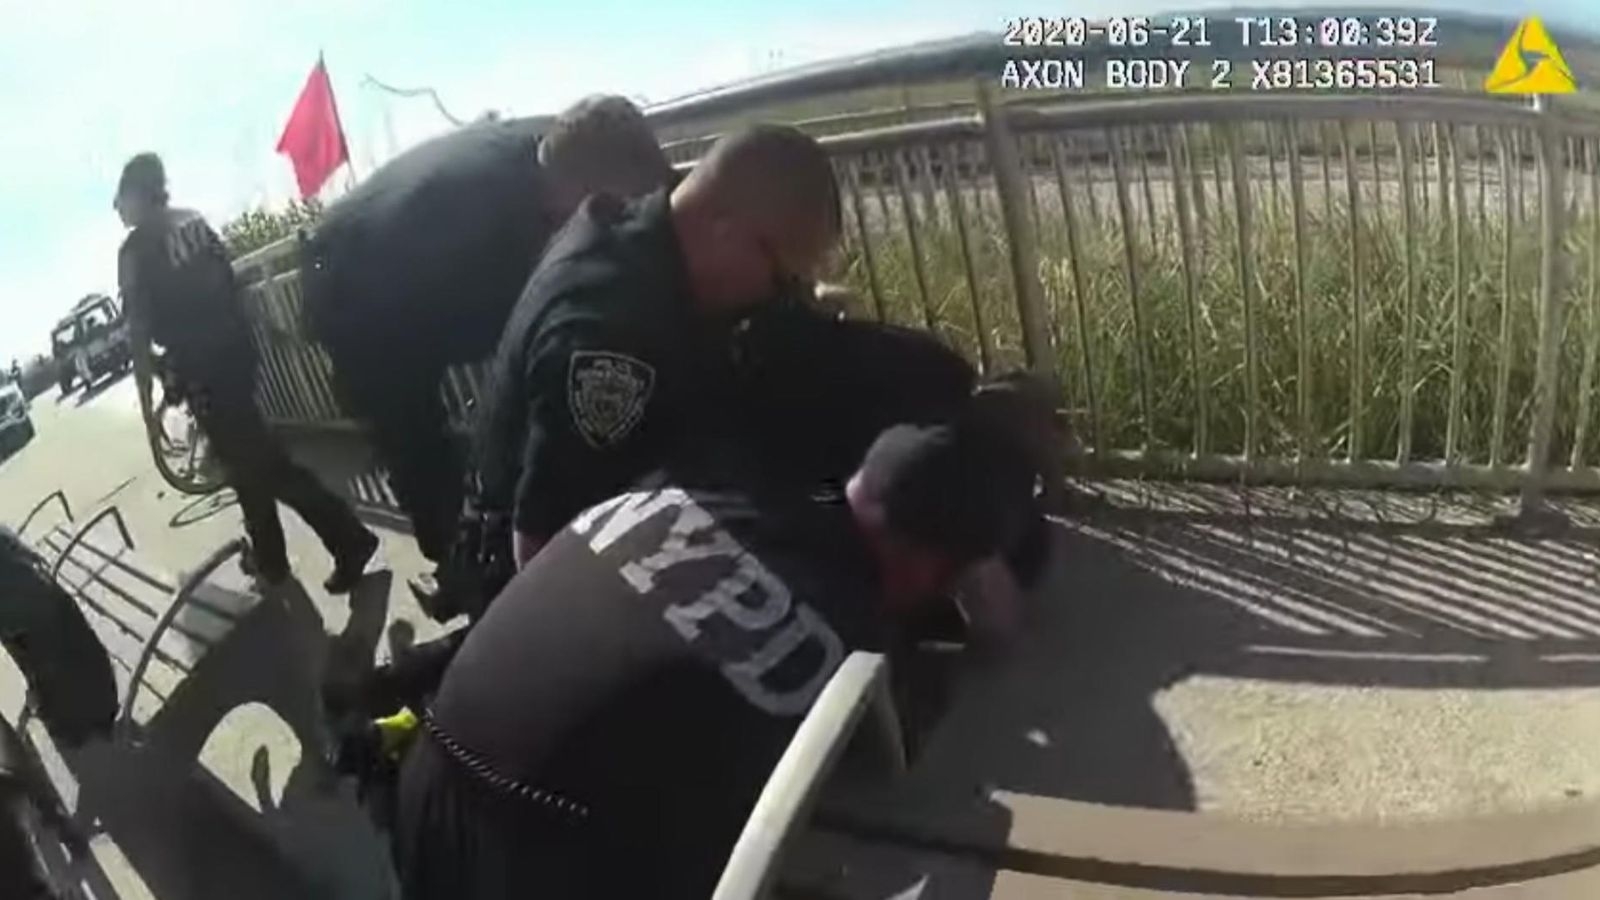 US News today, June 22: A New York cop suspended over the use of a "disturbing apparent chokehold"